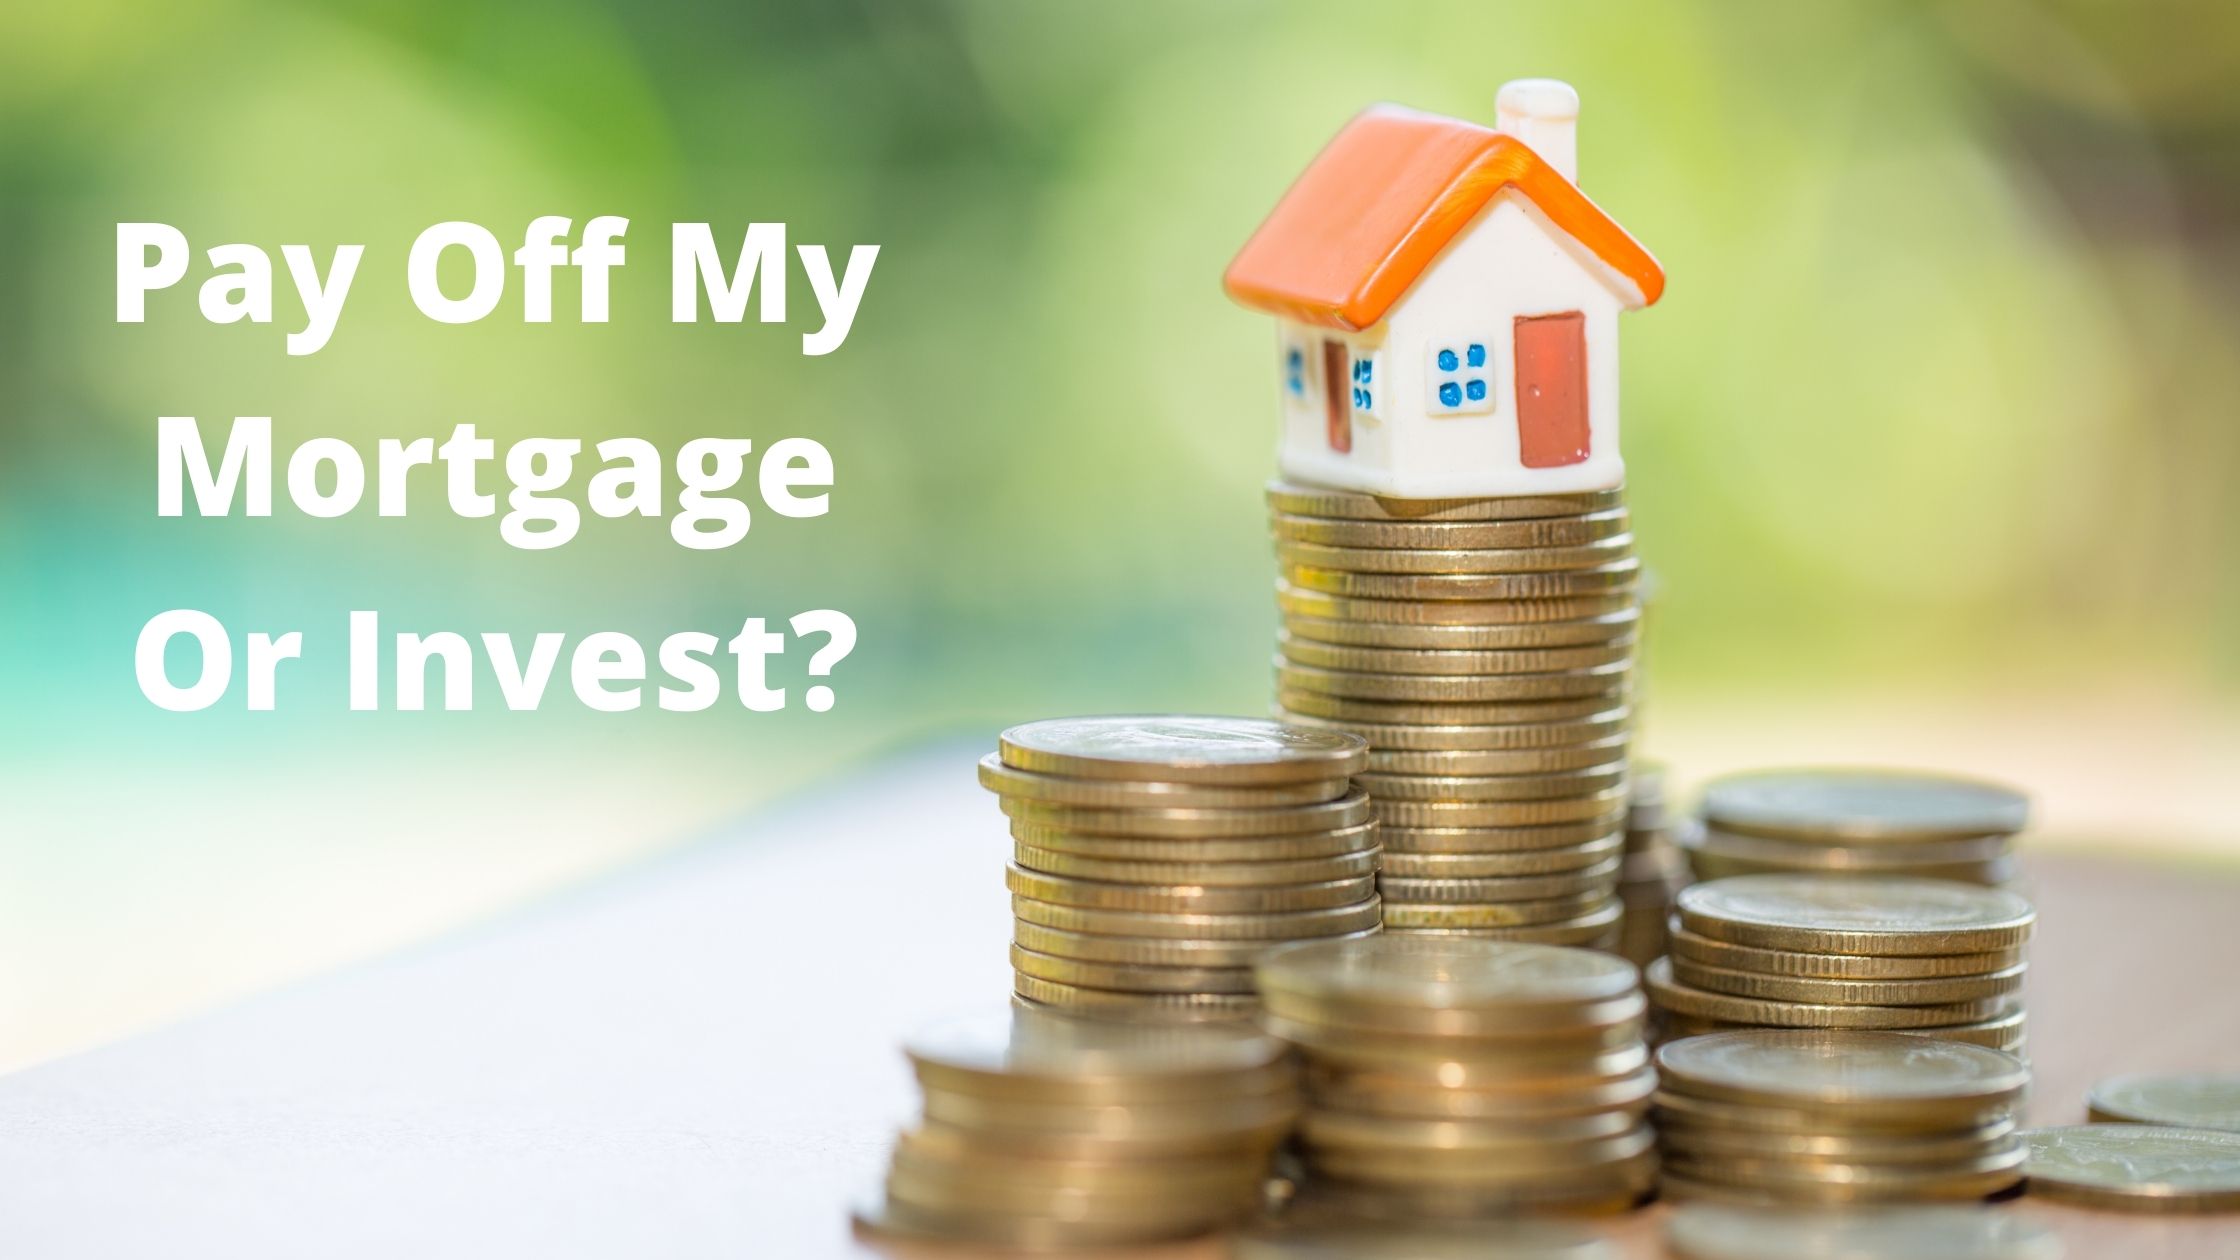 Pay off my mortgage or invest